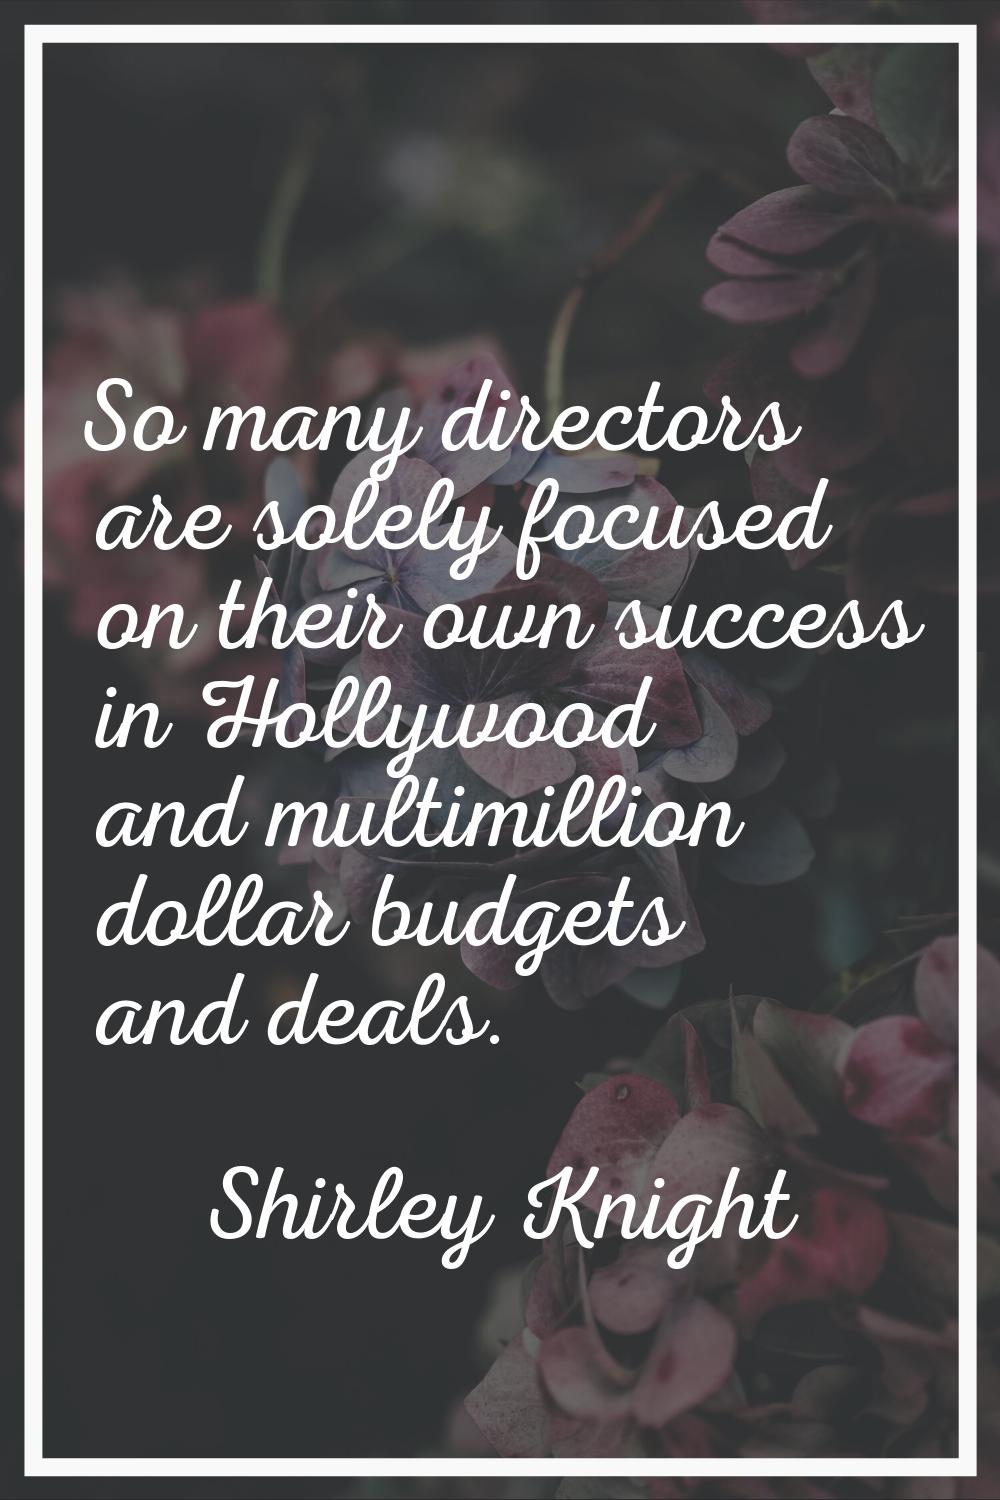 So many directors are solely focused on their own success in Hollywood and multimillion dollar budg